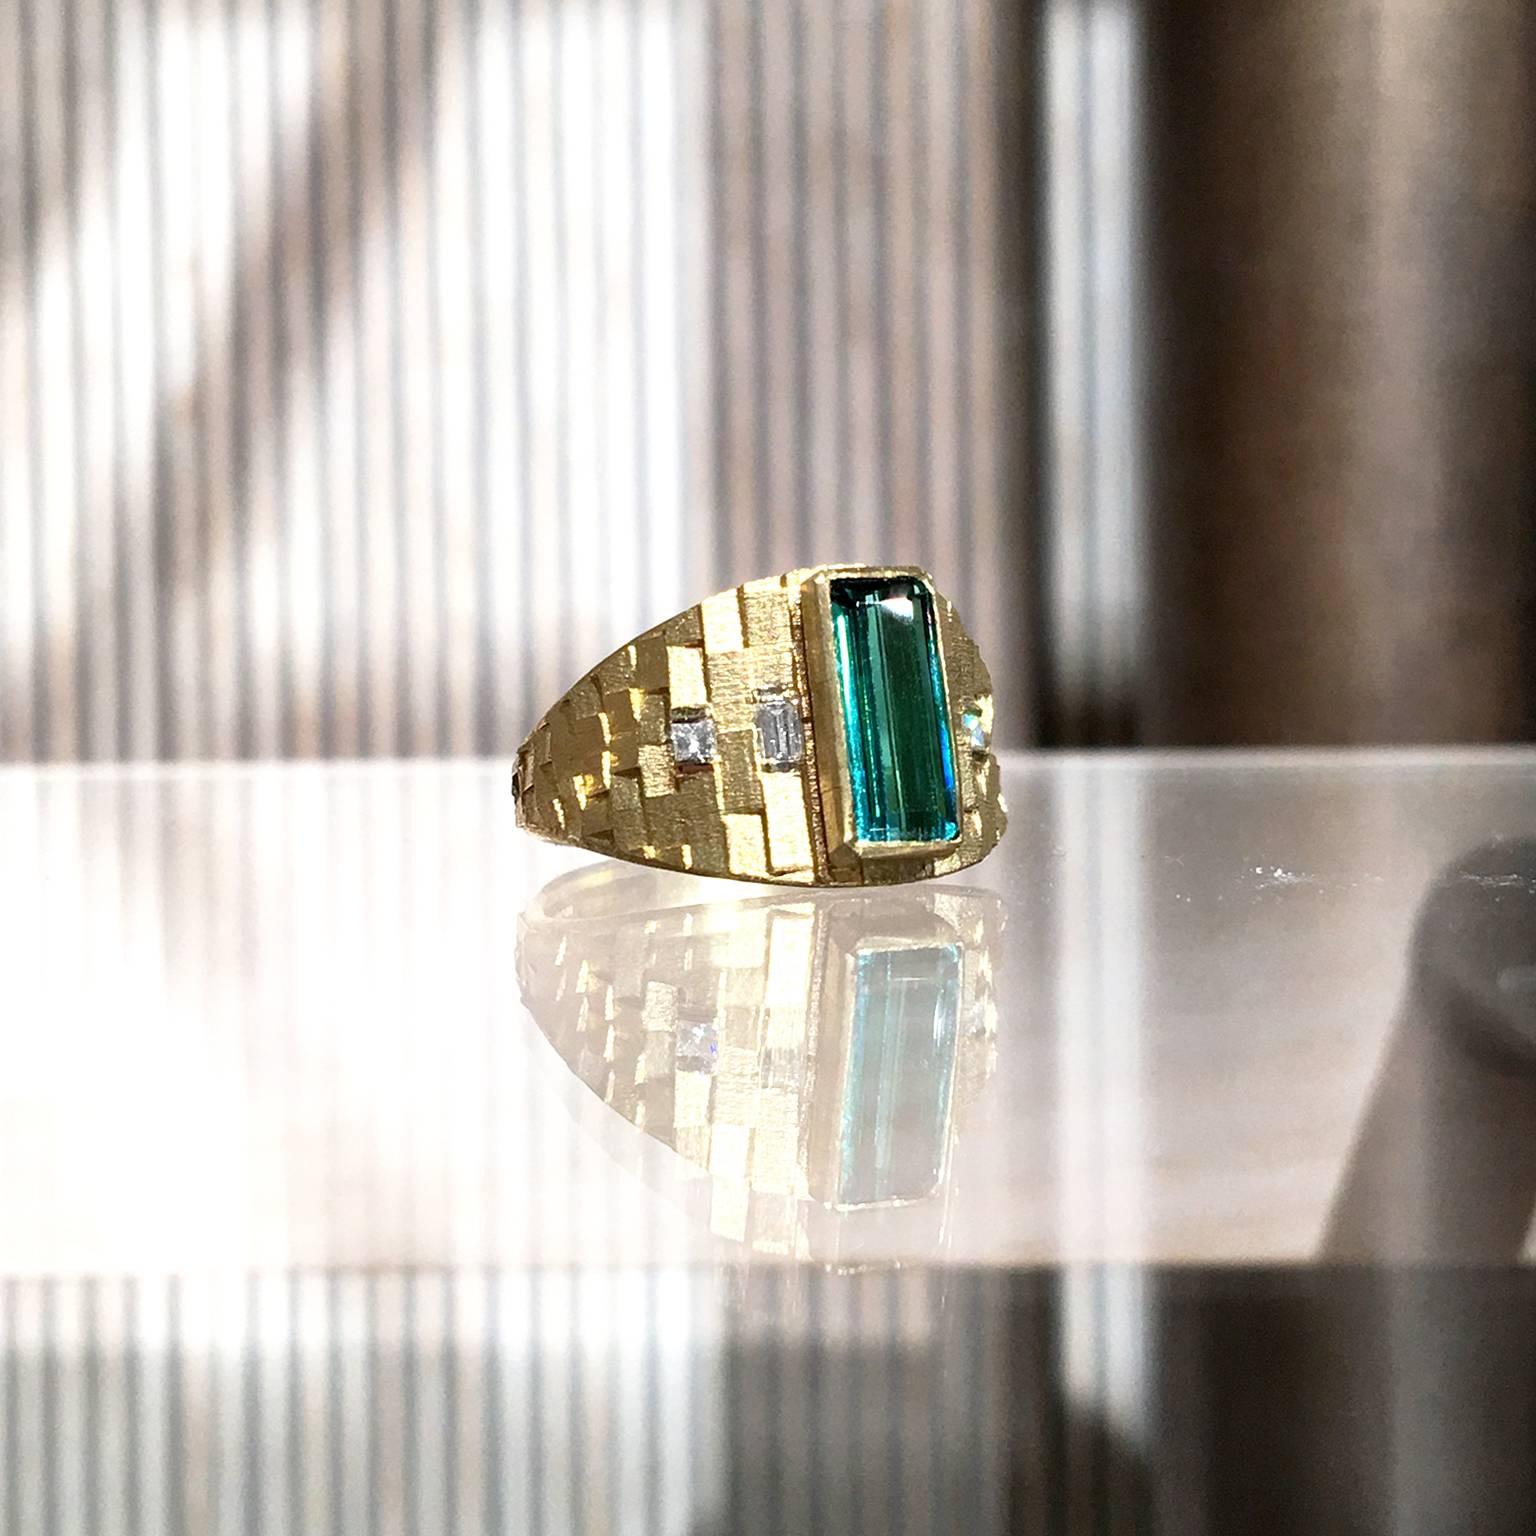 One of a Kind Tapered Deco Ring created by London-based jewellery artist Jo Hayes Ward showcasing a 1.30 carat bluish green tourmaline custom-cut baguette (10mm x 4mm), two white diamond baguettes, and two princess-cut white diamonds, all bezel-set